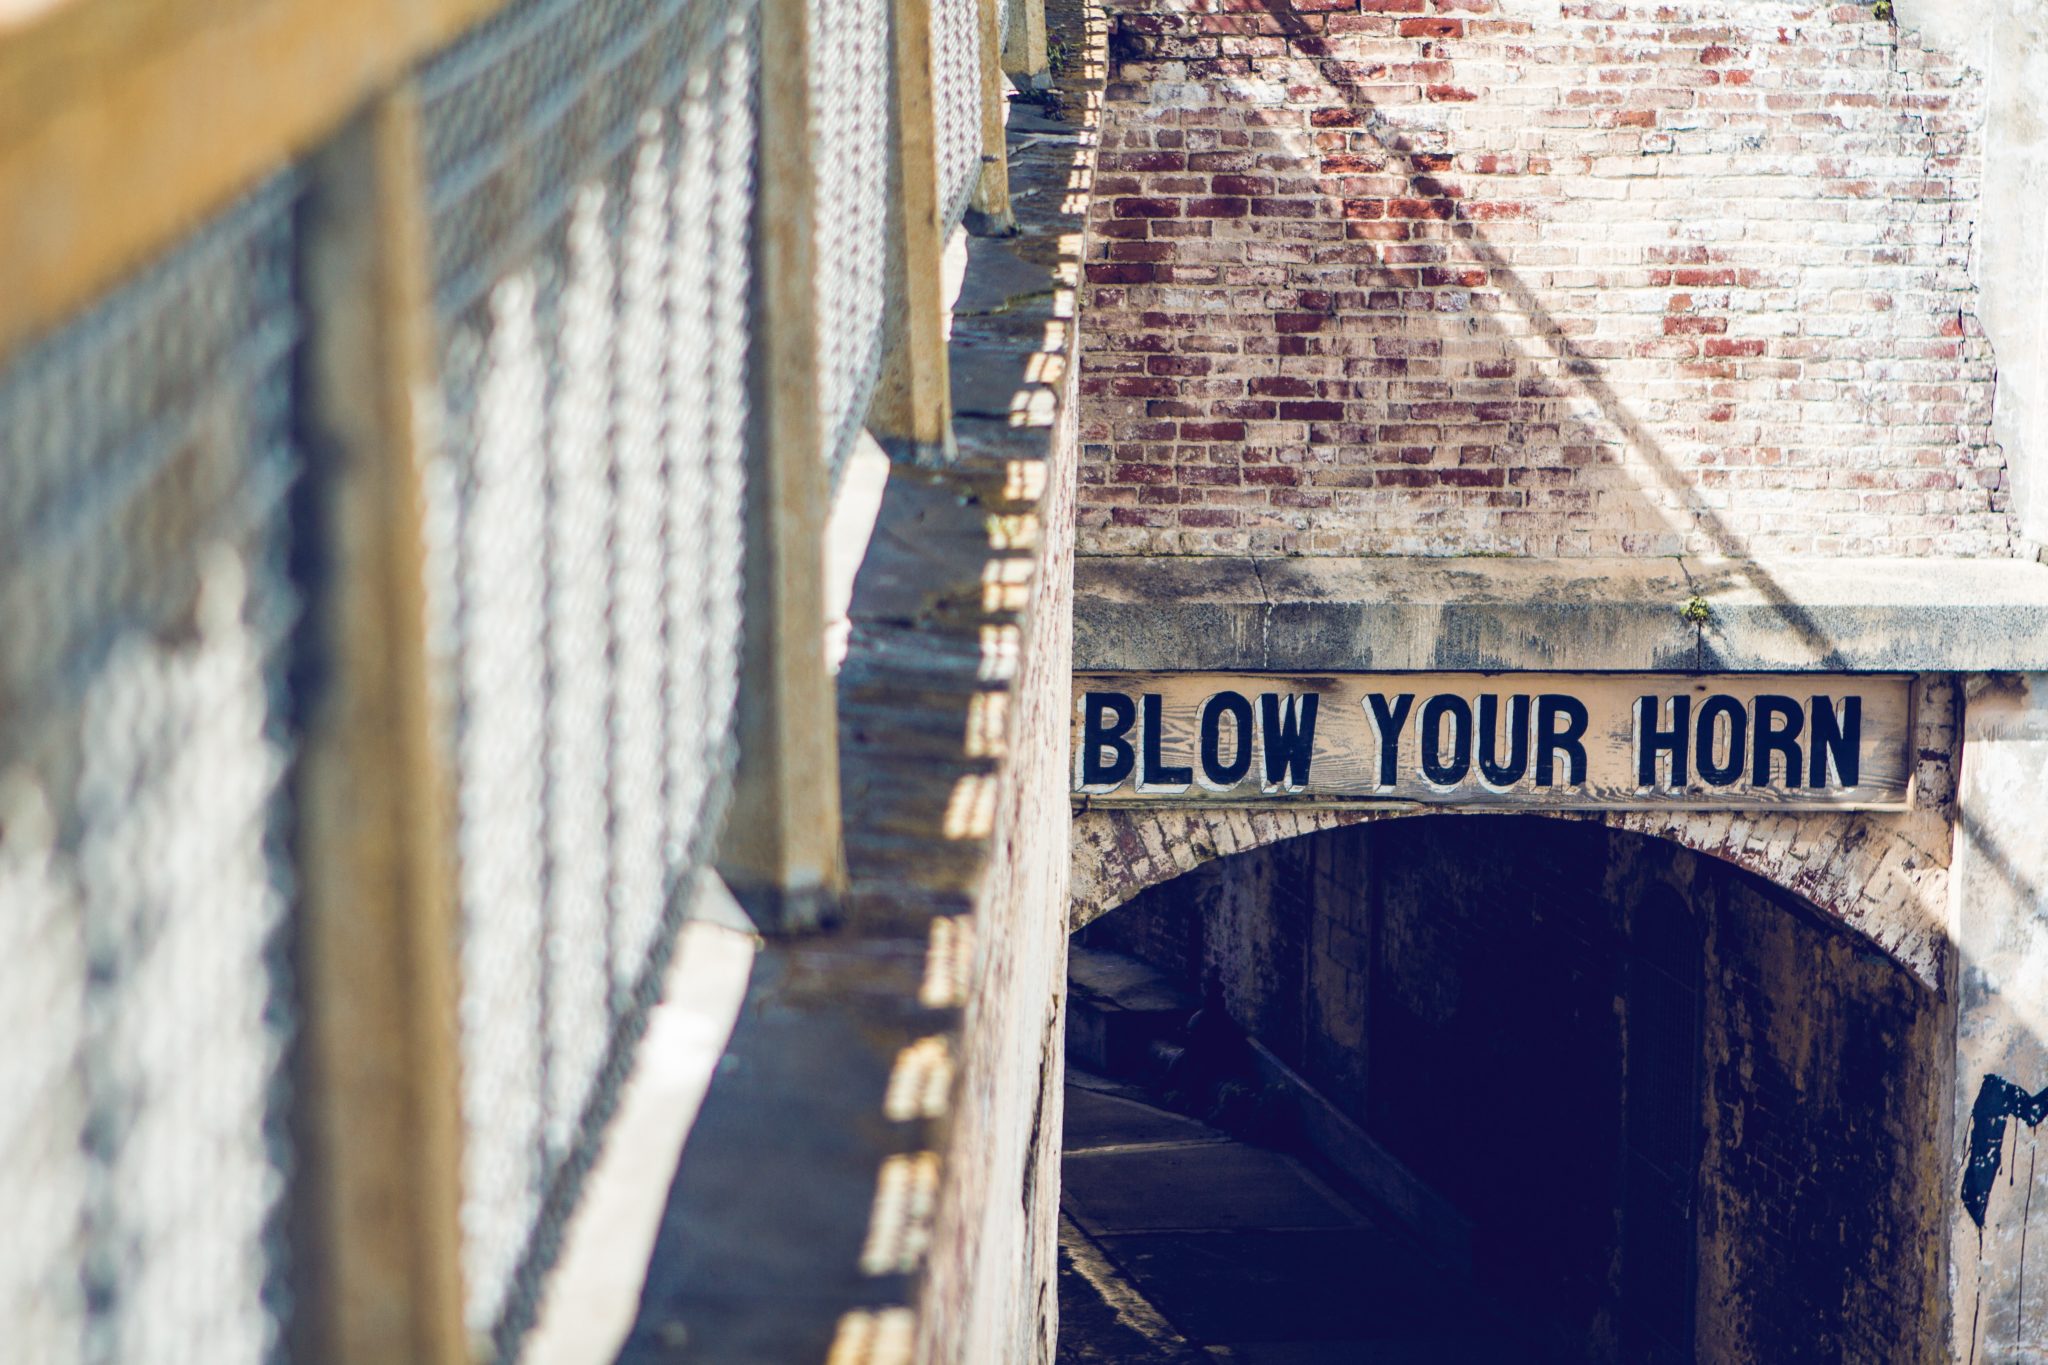 Tunnel with "Blow Your Horn" sign